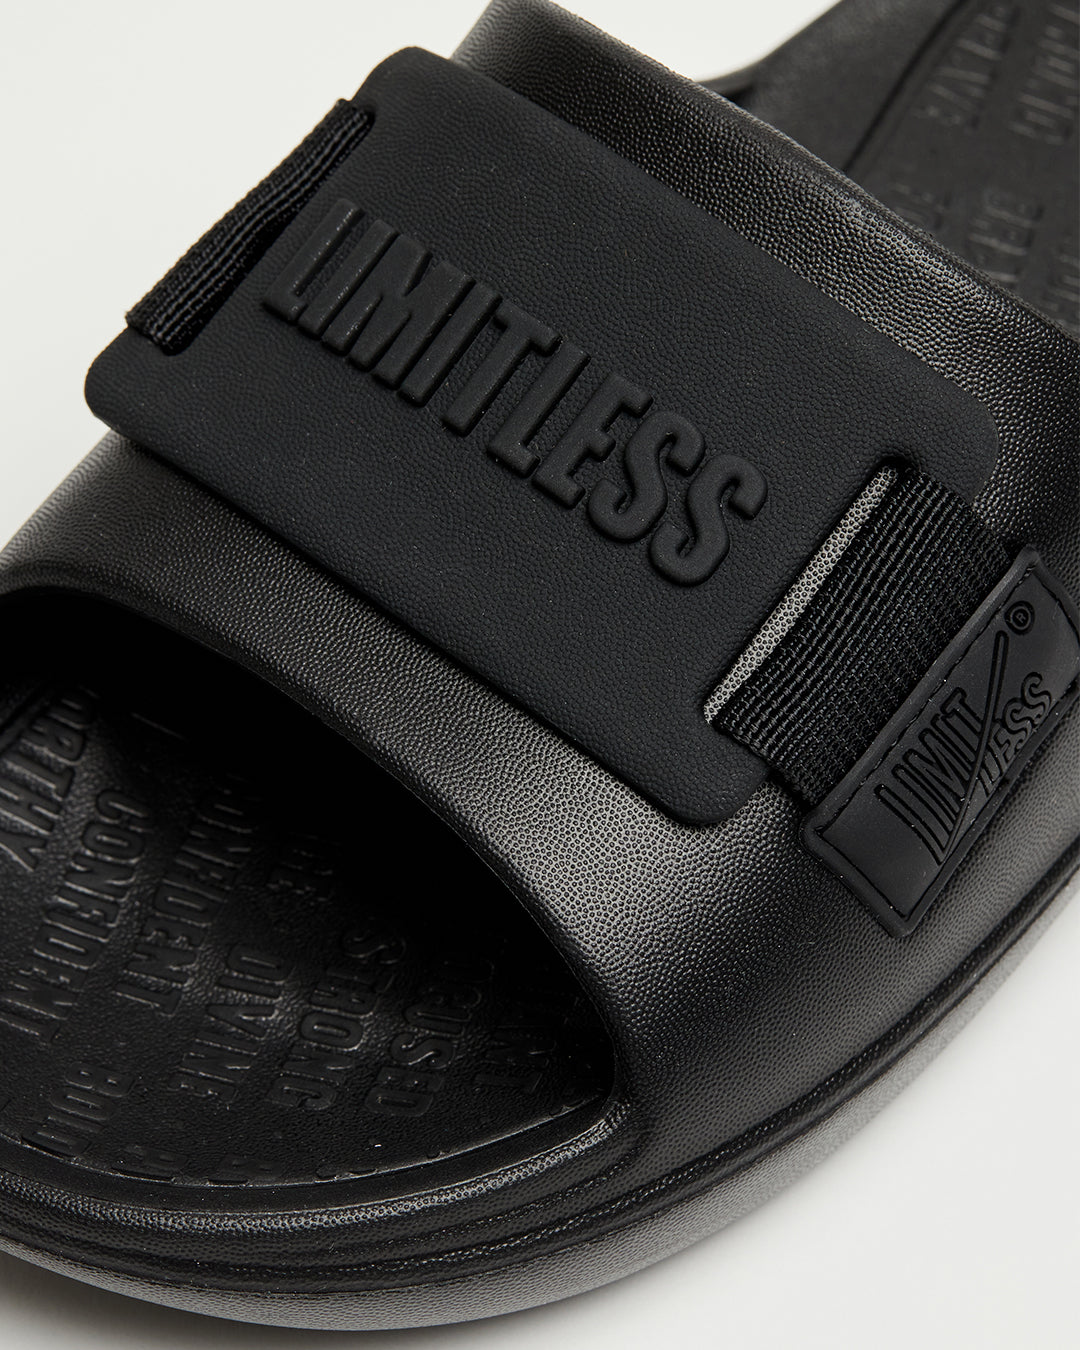 LIMITLESS SLIDES™ WITH ESSENTIAL TIBAH™ QUAD - GRANT COMMUNITY HIGH SCHOOL EDITION